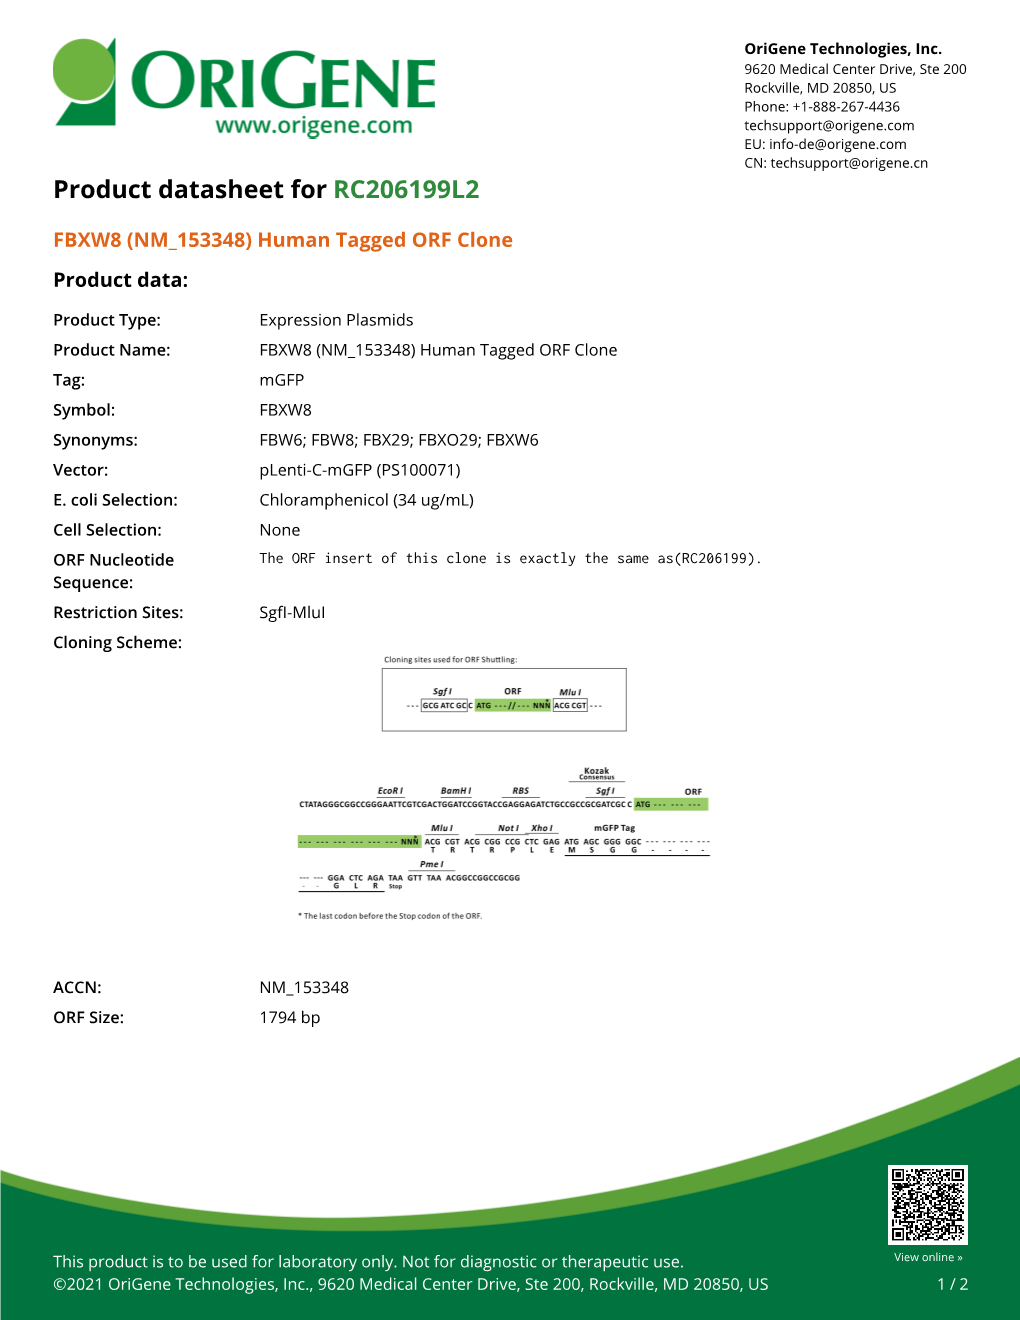 FBXW8 (NM 153348) Human Tagged ORF Clone Product Data